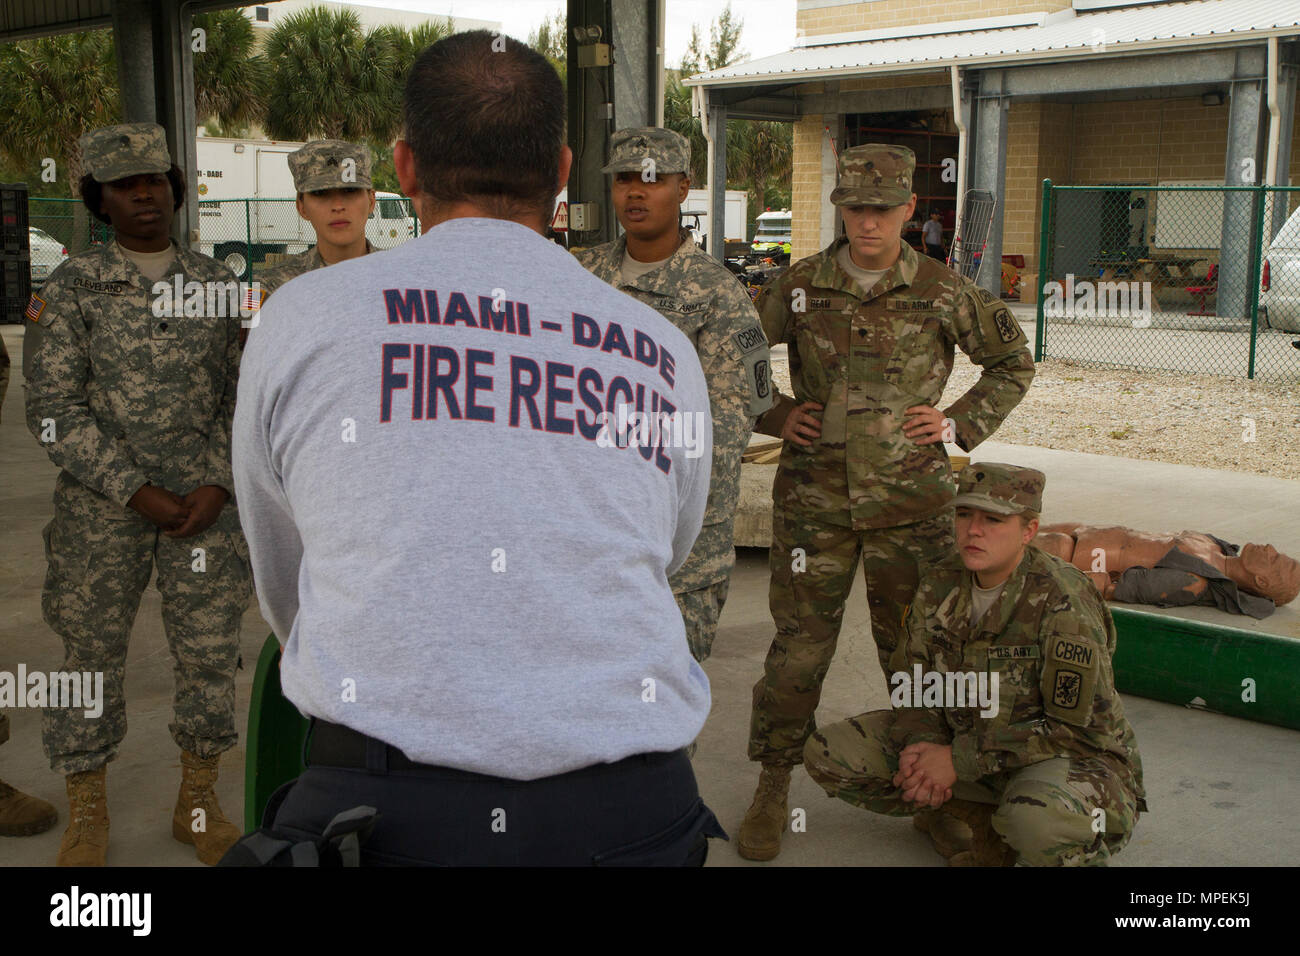 Firefighter David Guerra, a flight medic with the Miami-Dade Fire Rescue Department (MDFR), talks with Army Reserve Soldiers assigned to the 329th Chemical, Biological, Radiological, and Nuclear (CBRN) Company (Reconnaissance and Surveillance), about how to safely and properly cap leaks in gas cylinders during joint training at the MDFR training facility on Feb. 17, 2017 in Doral, Fla. The 329th CBRN Company, from Orlando, Fla., the Army Reserve’s 469th Ground Ambulance Company, from Wichita, Kan., and the Florida National Guard’s Civil Support Team, spent the day training with MDFR firefighte Stock Photo